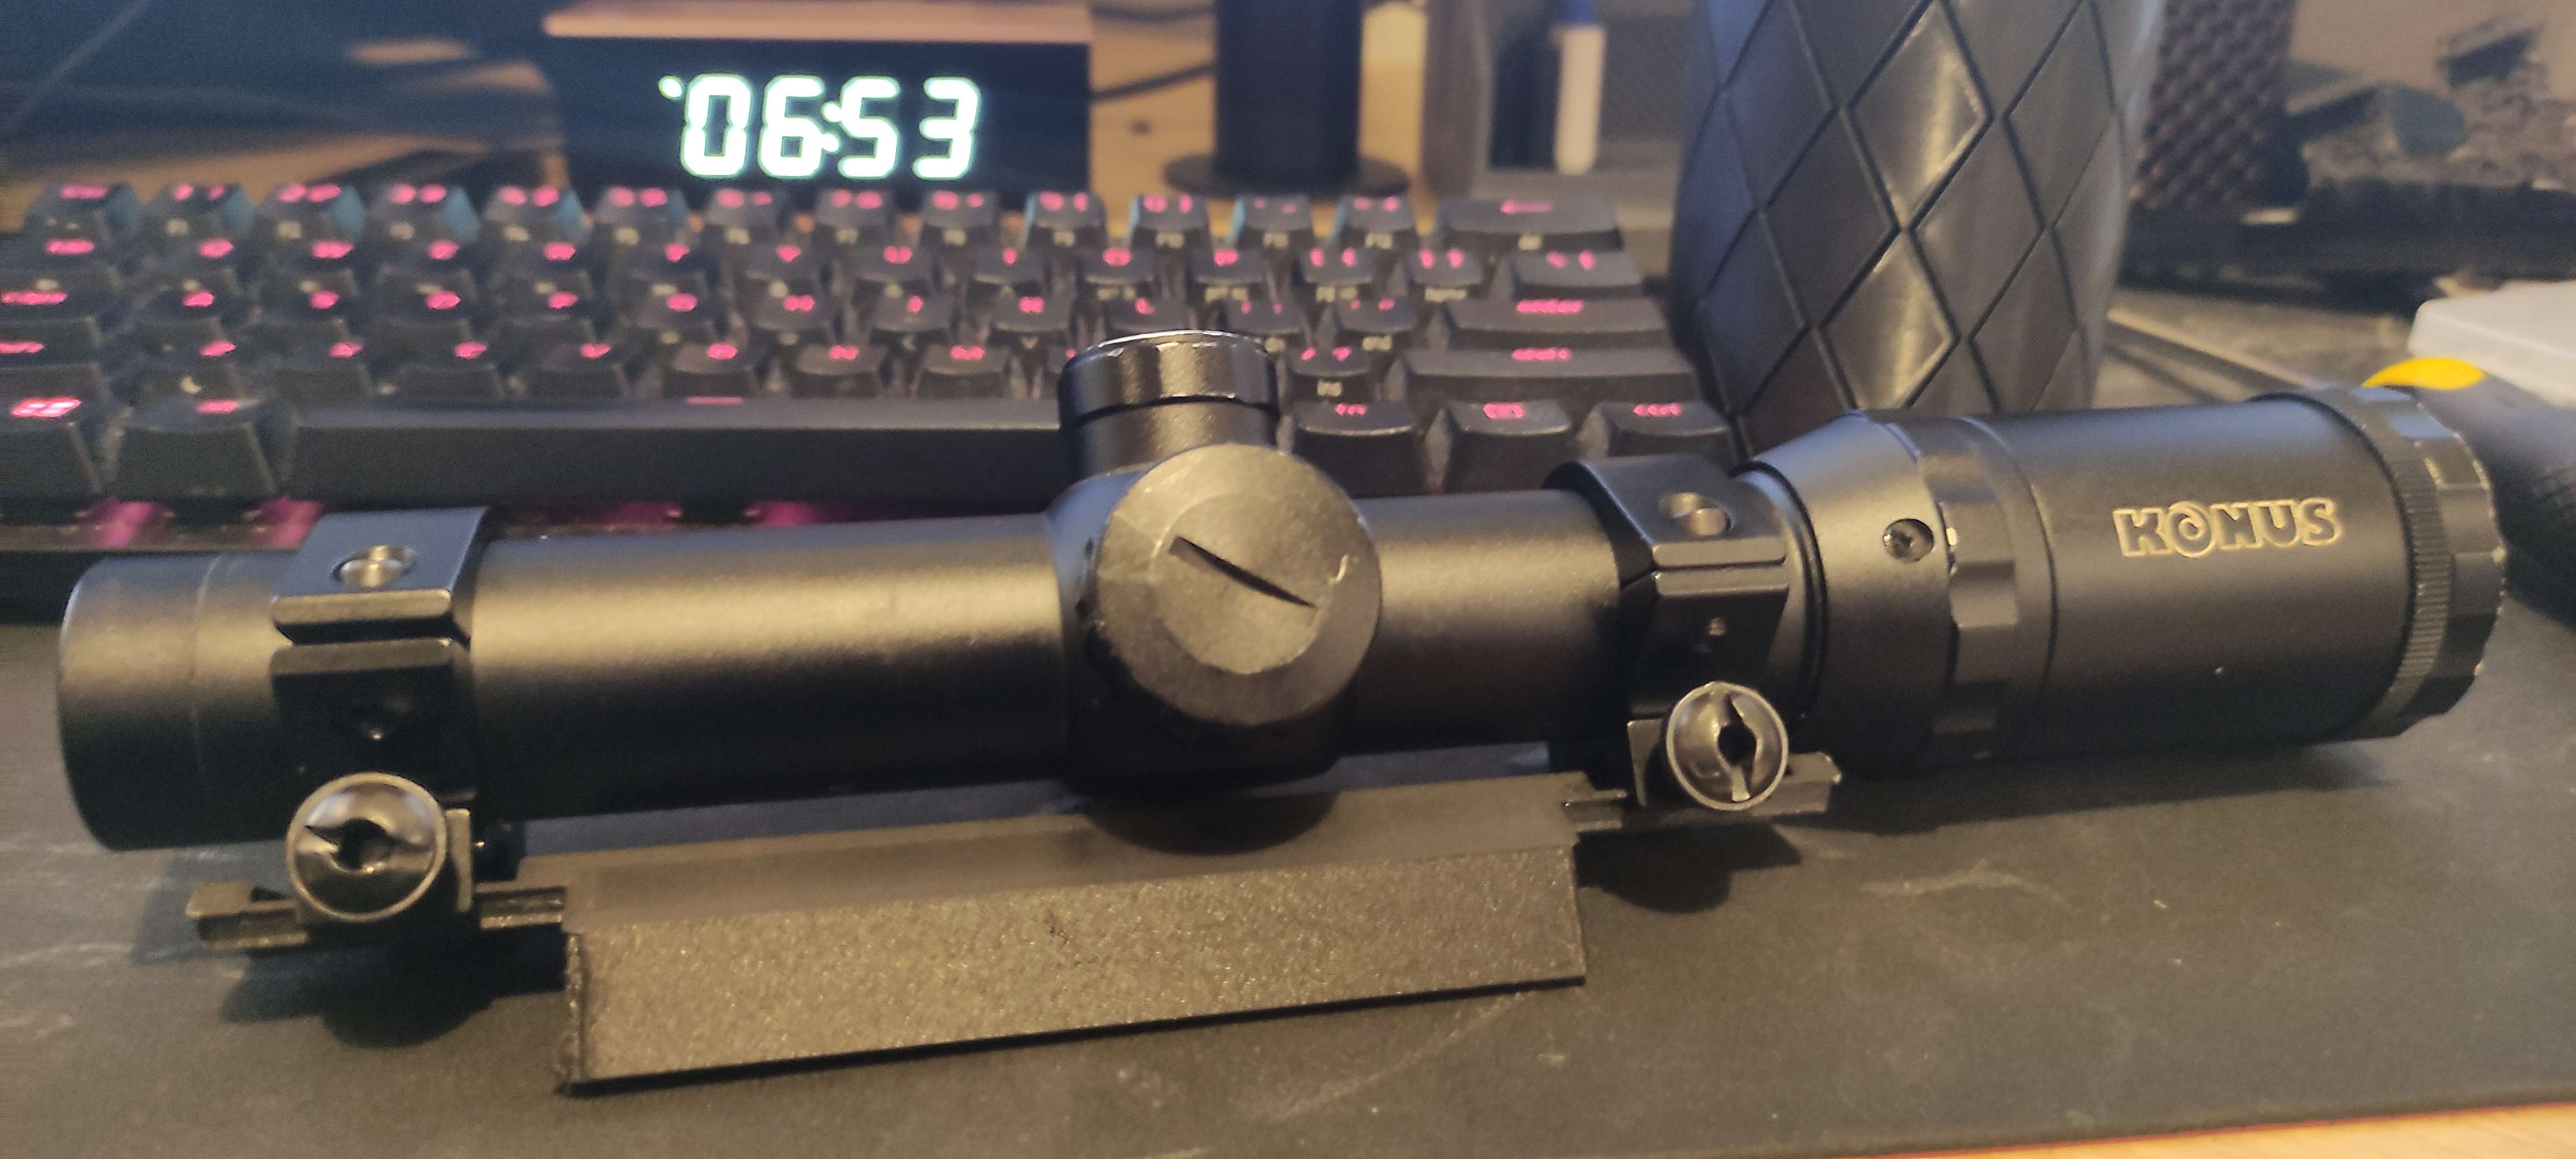 Picatinny scope mount for 1 inch receivers